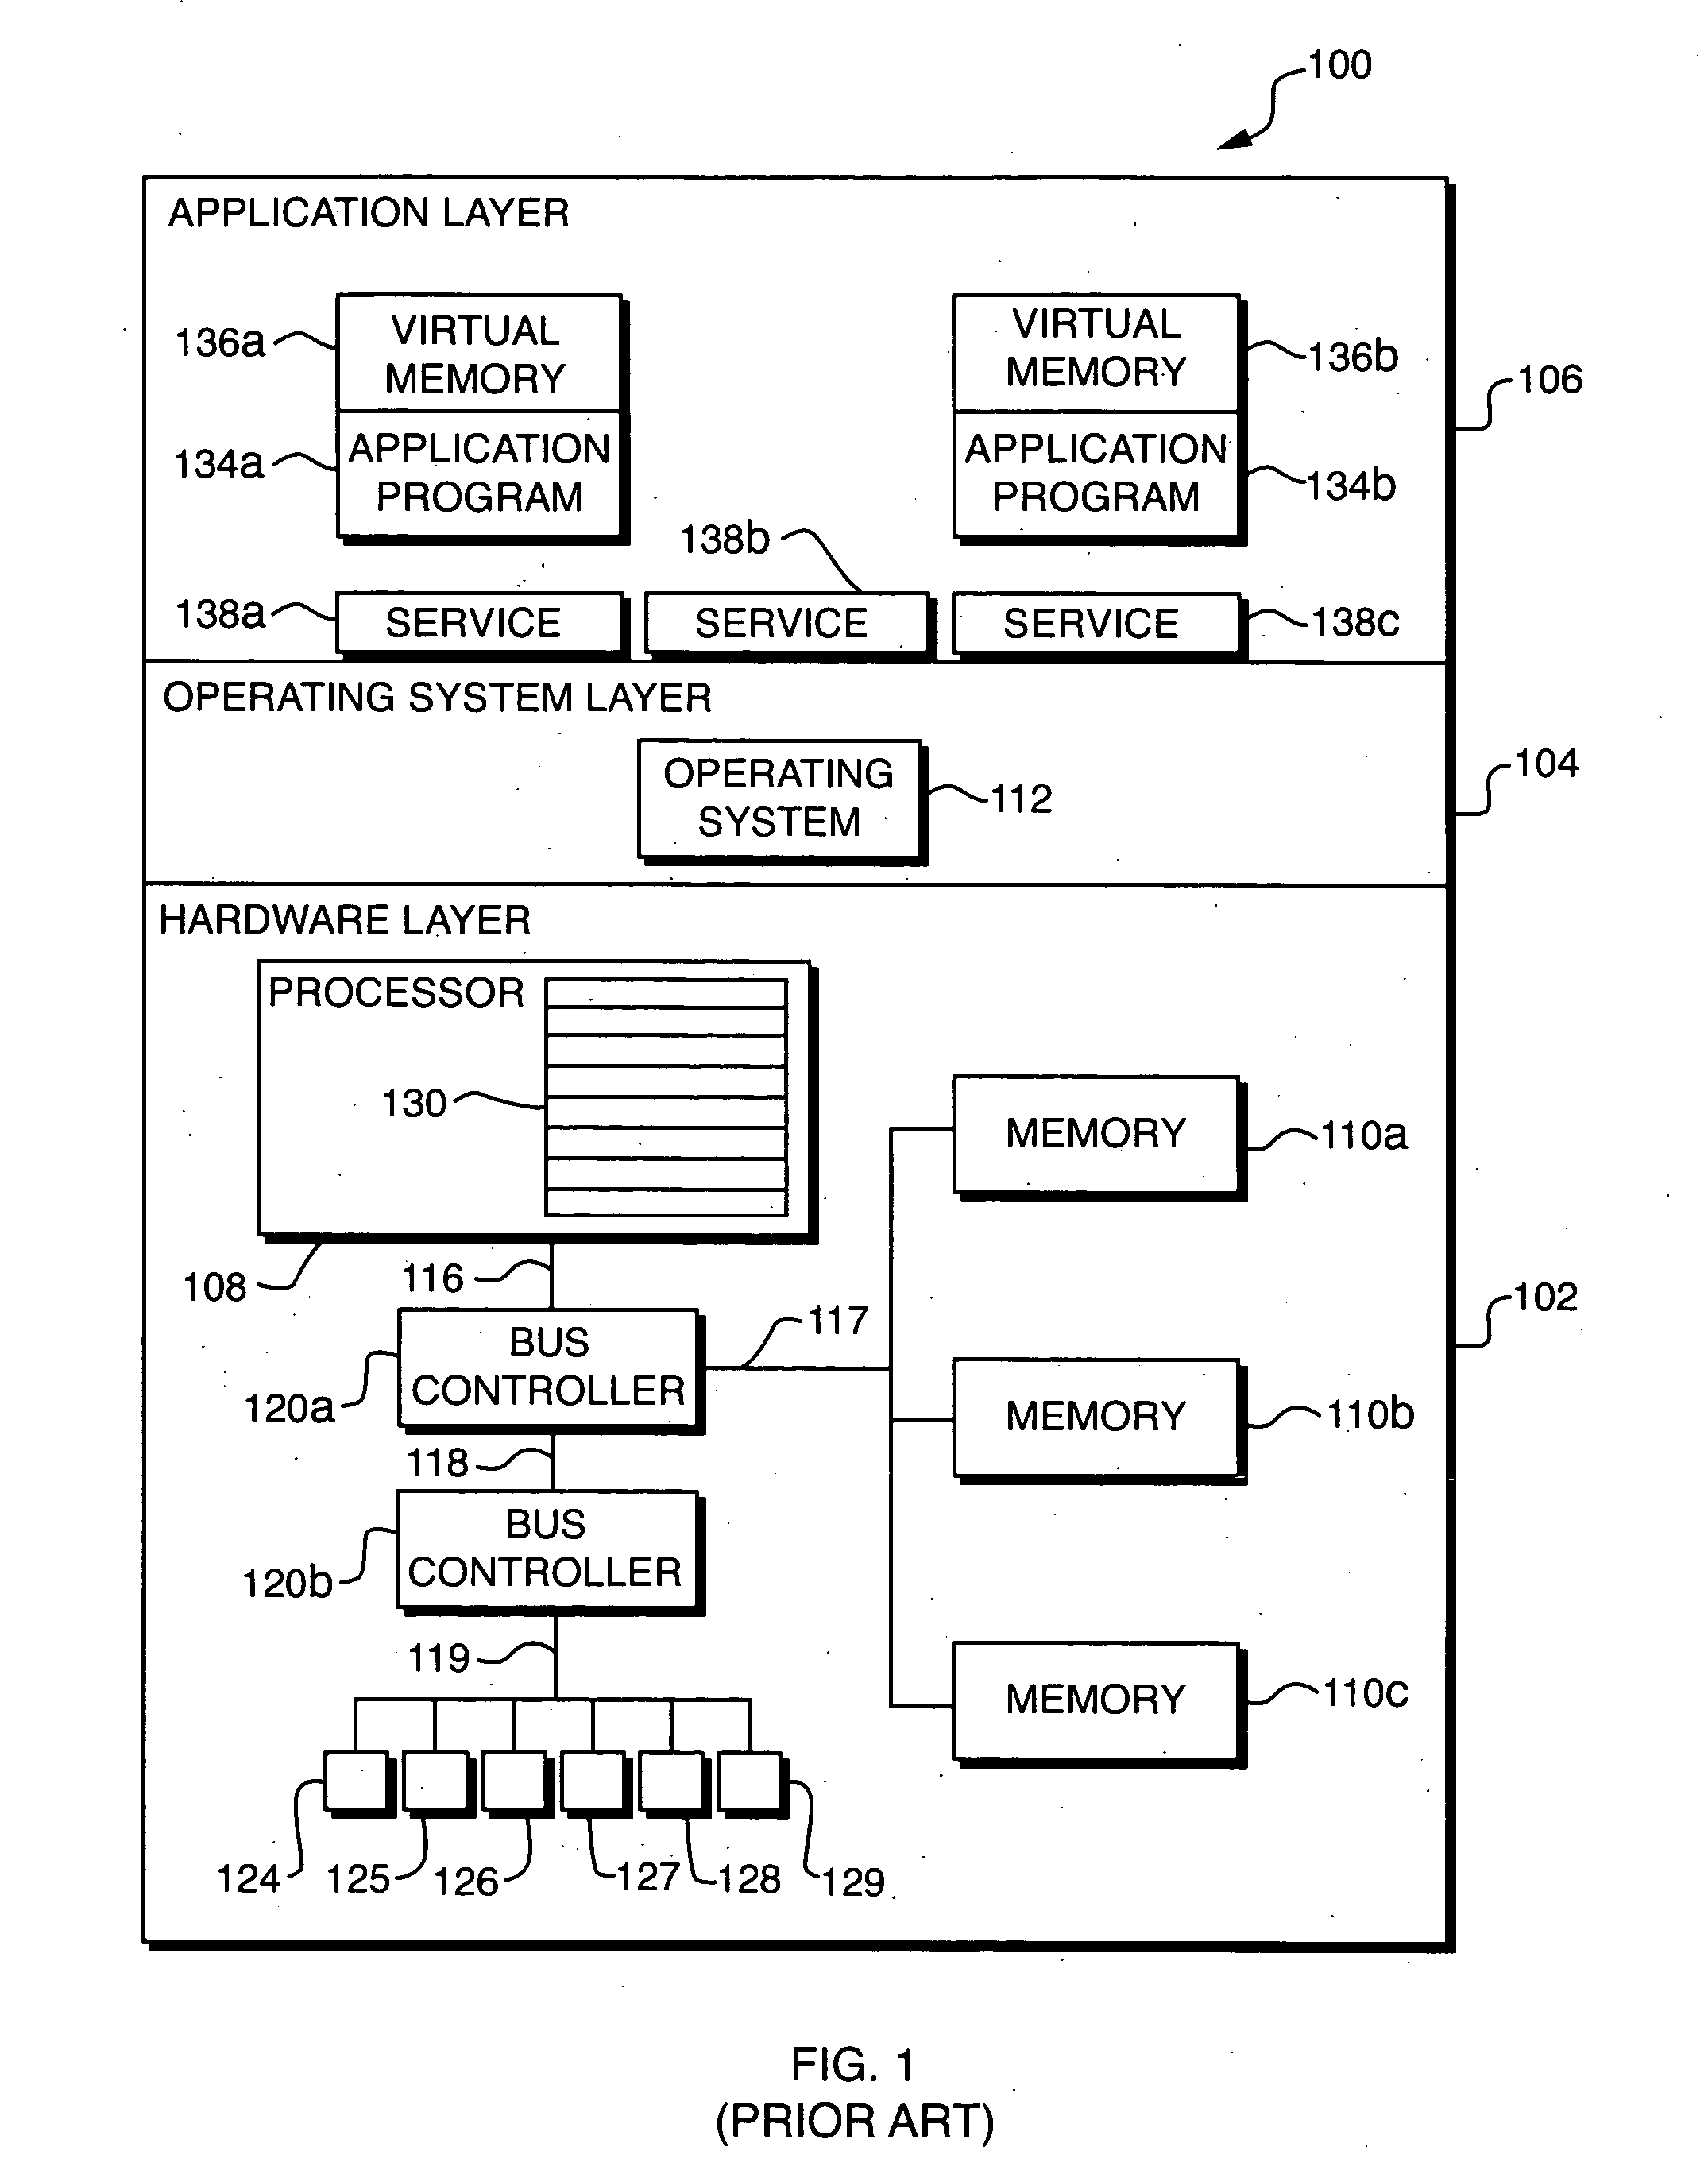 Computer system resource access control